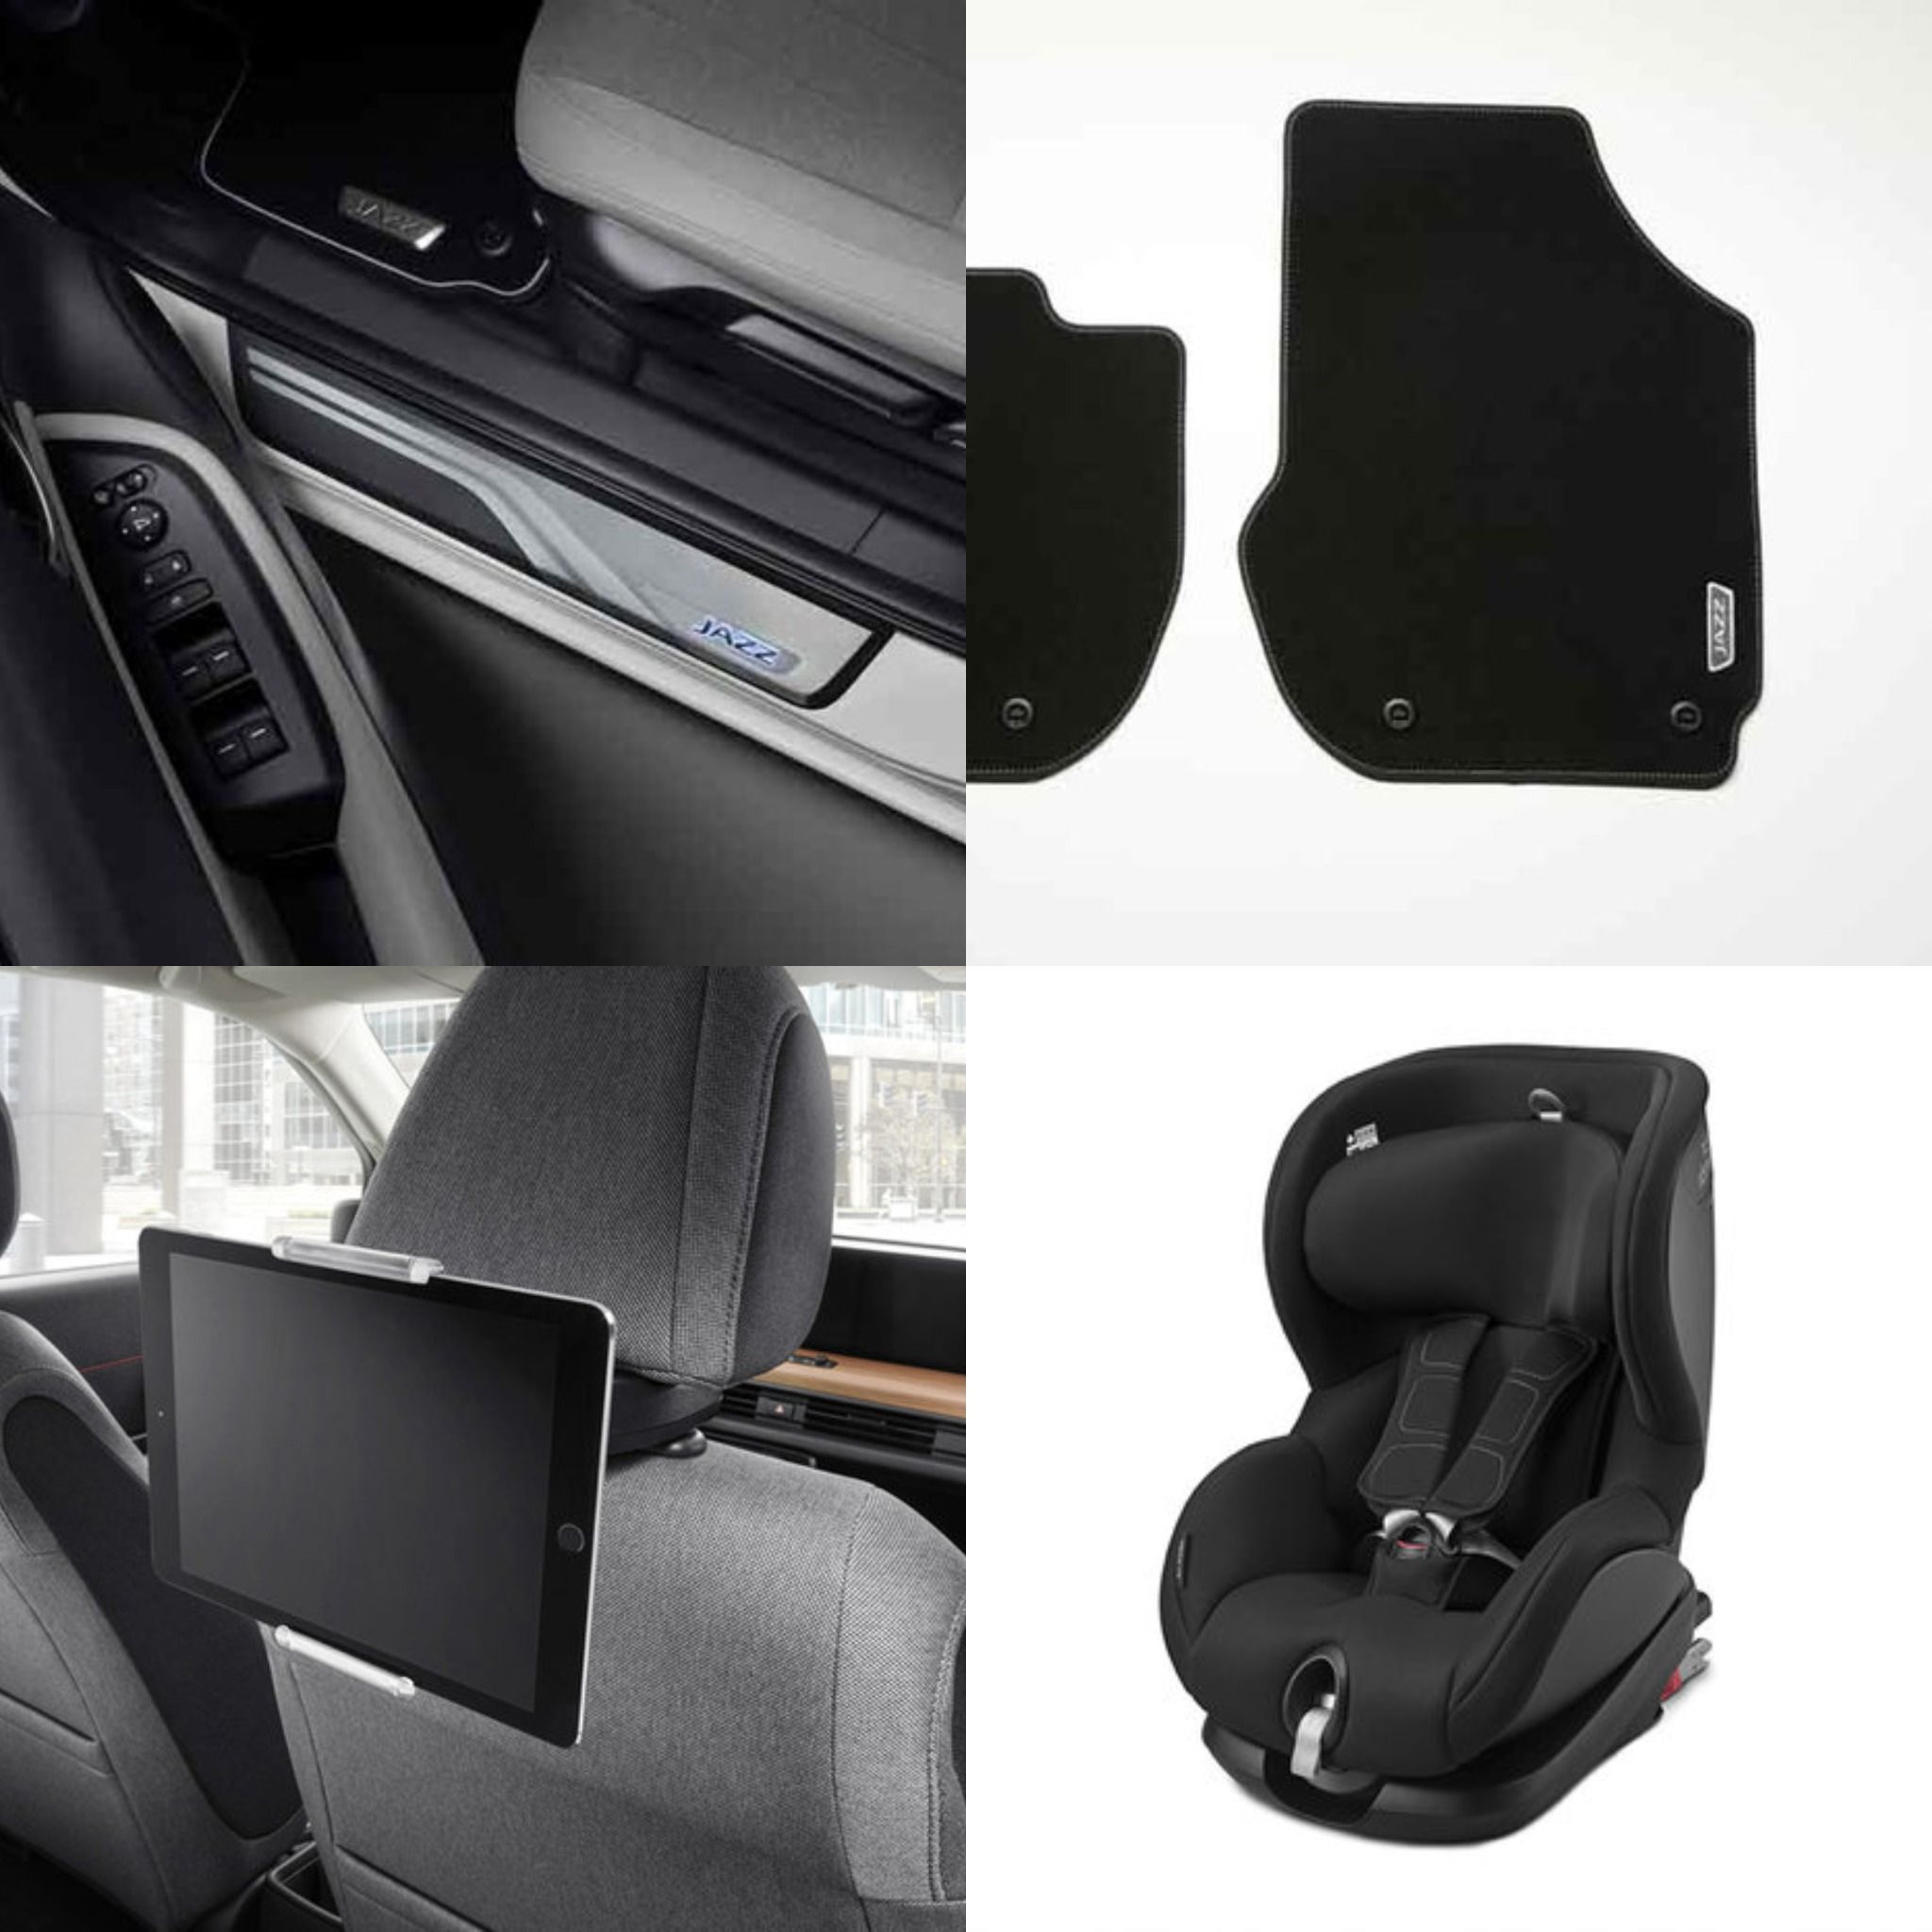 Close up of Honda Jazz interior accessories such as car mats, baby seat, sil covers ect